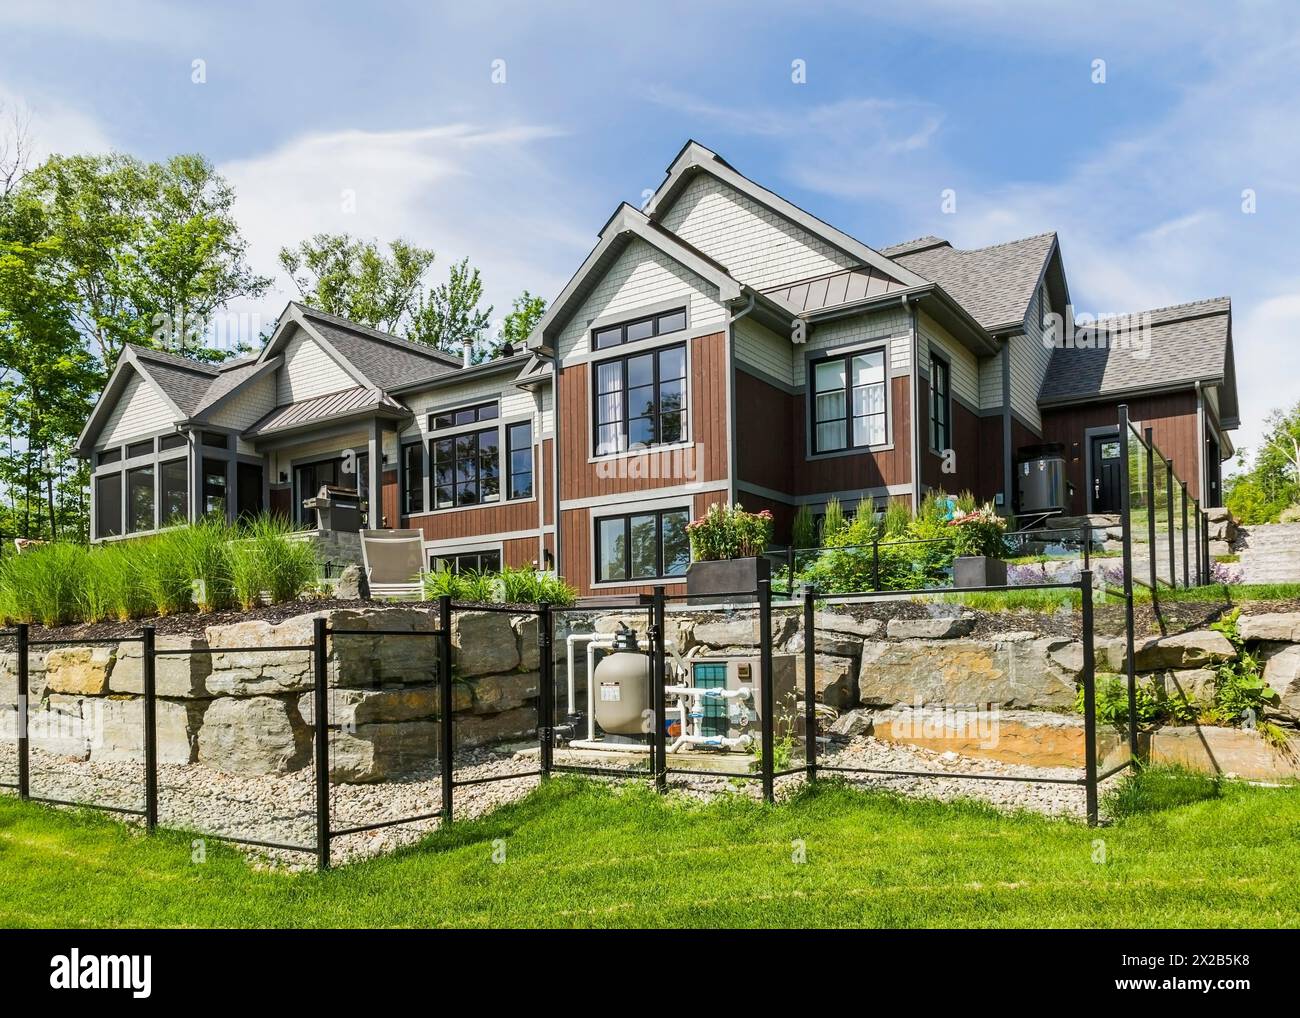 Rear view of contemporary natural stone and brown stained wood and cedar shingles clad luxurious bungalow style home in summer, Quebec, Canada, North Stock Photo